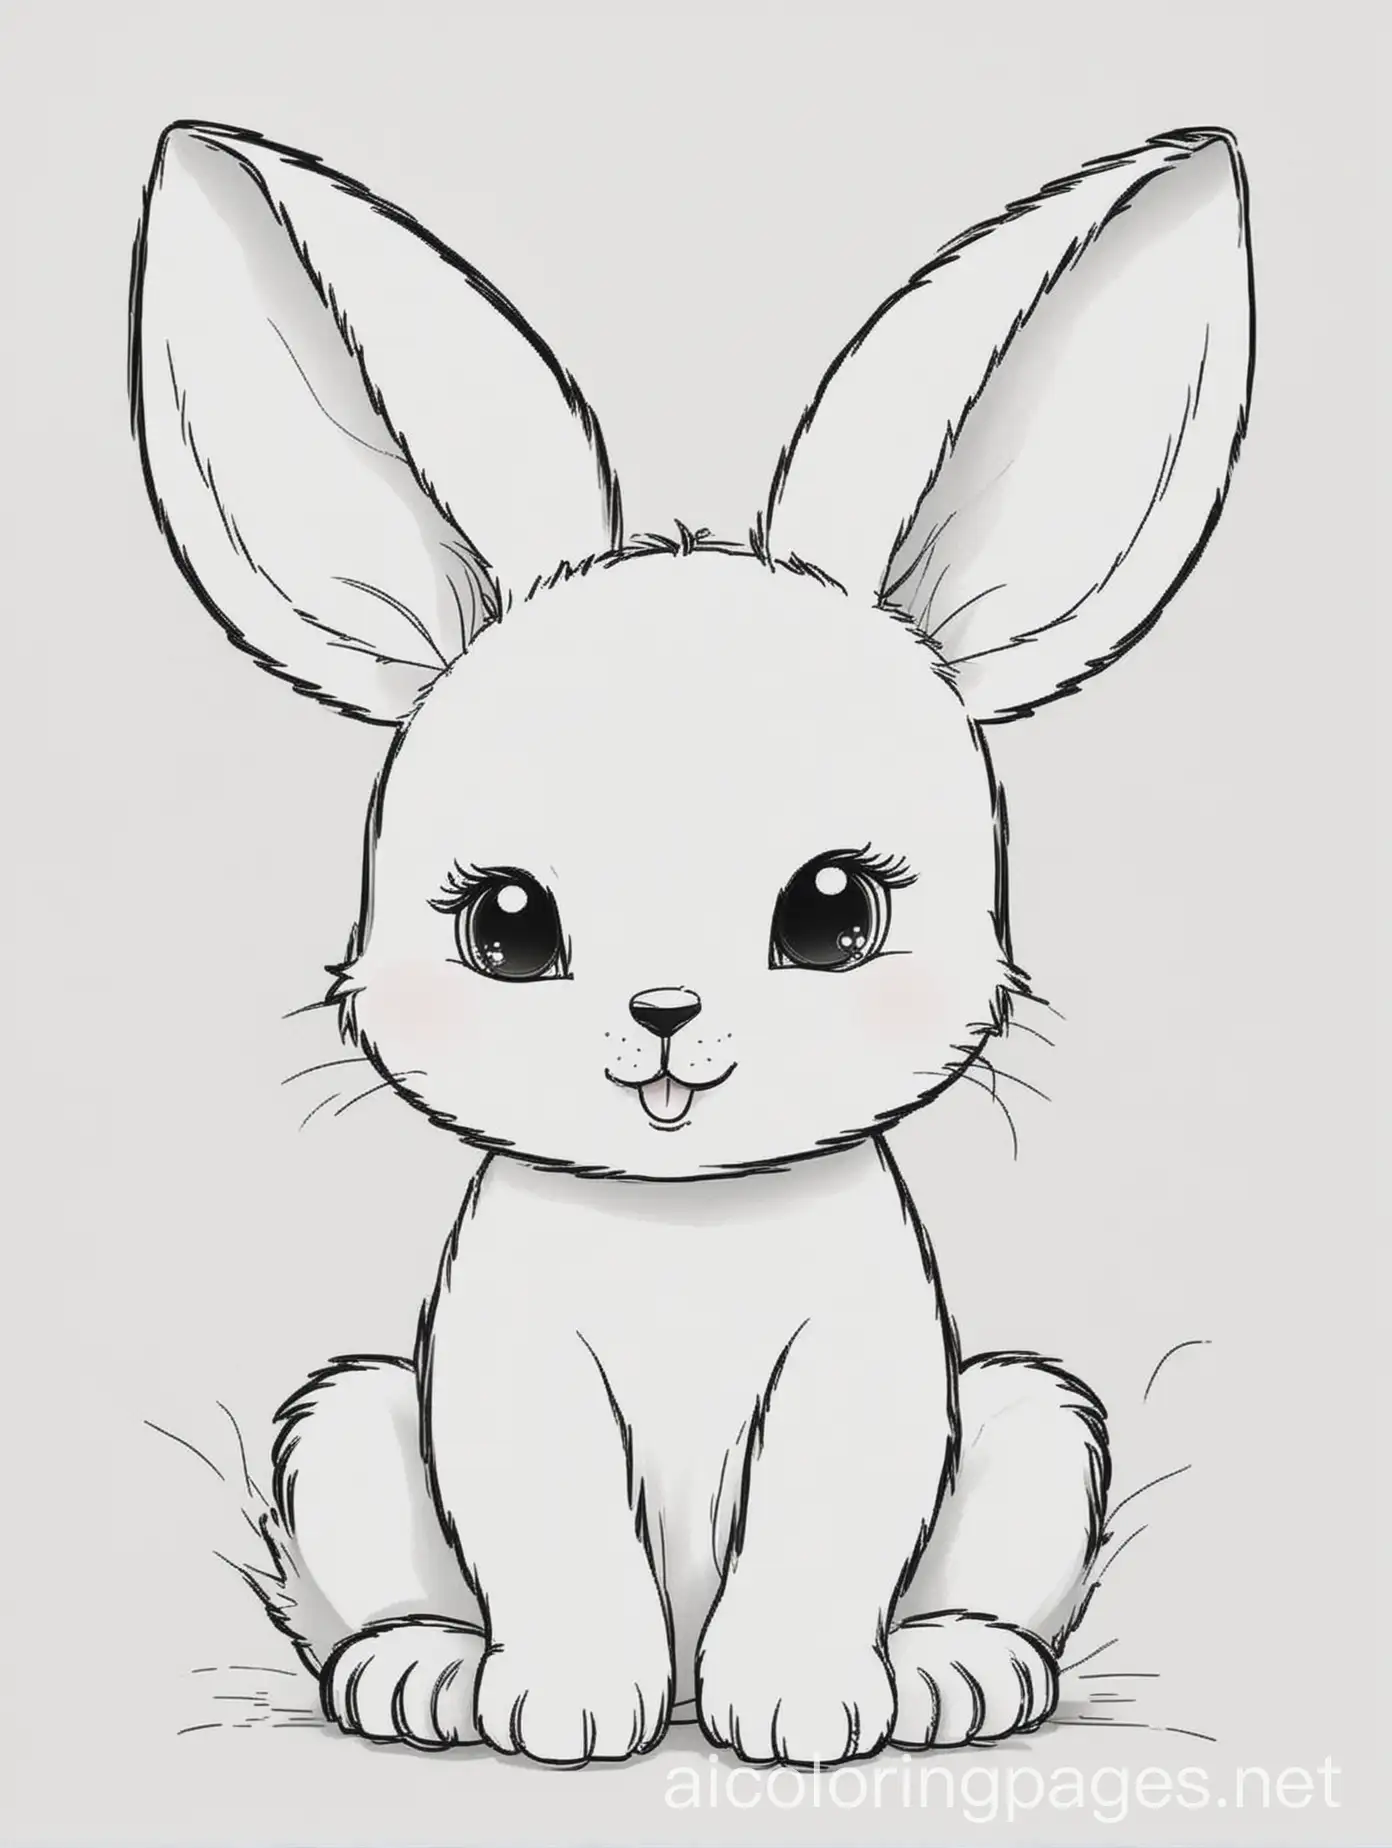 cute baby rabbit, Coloring Page, black and white, line art, white background, Simplicity, Ample White Space. The background of the coloring page is plain white to make it easy for young children to color within the lines. The outlines of all the subjects are easy to distinguish, making it simple for kids to color without too much difficulty, Coloring Page, black and white, line art, white background, Simplicity, Ample White Space. The background of the coloring page is plain white to make it easy for young children to color within the lines. The outlines of all the subjects are easy to distinguish, making it simple for kids to color without too much difficulty